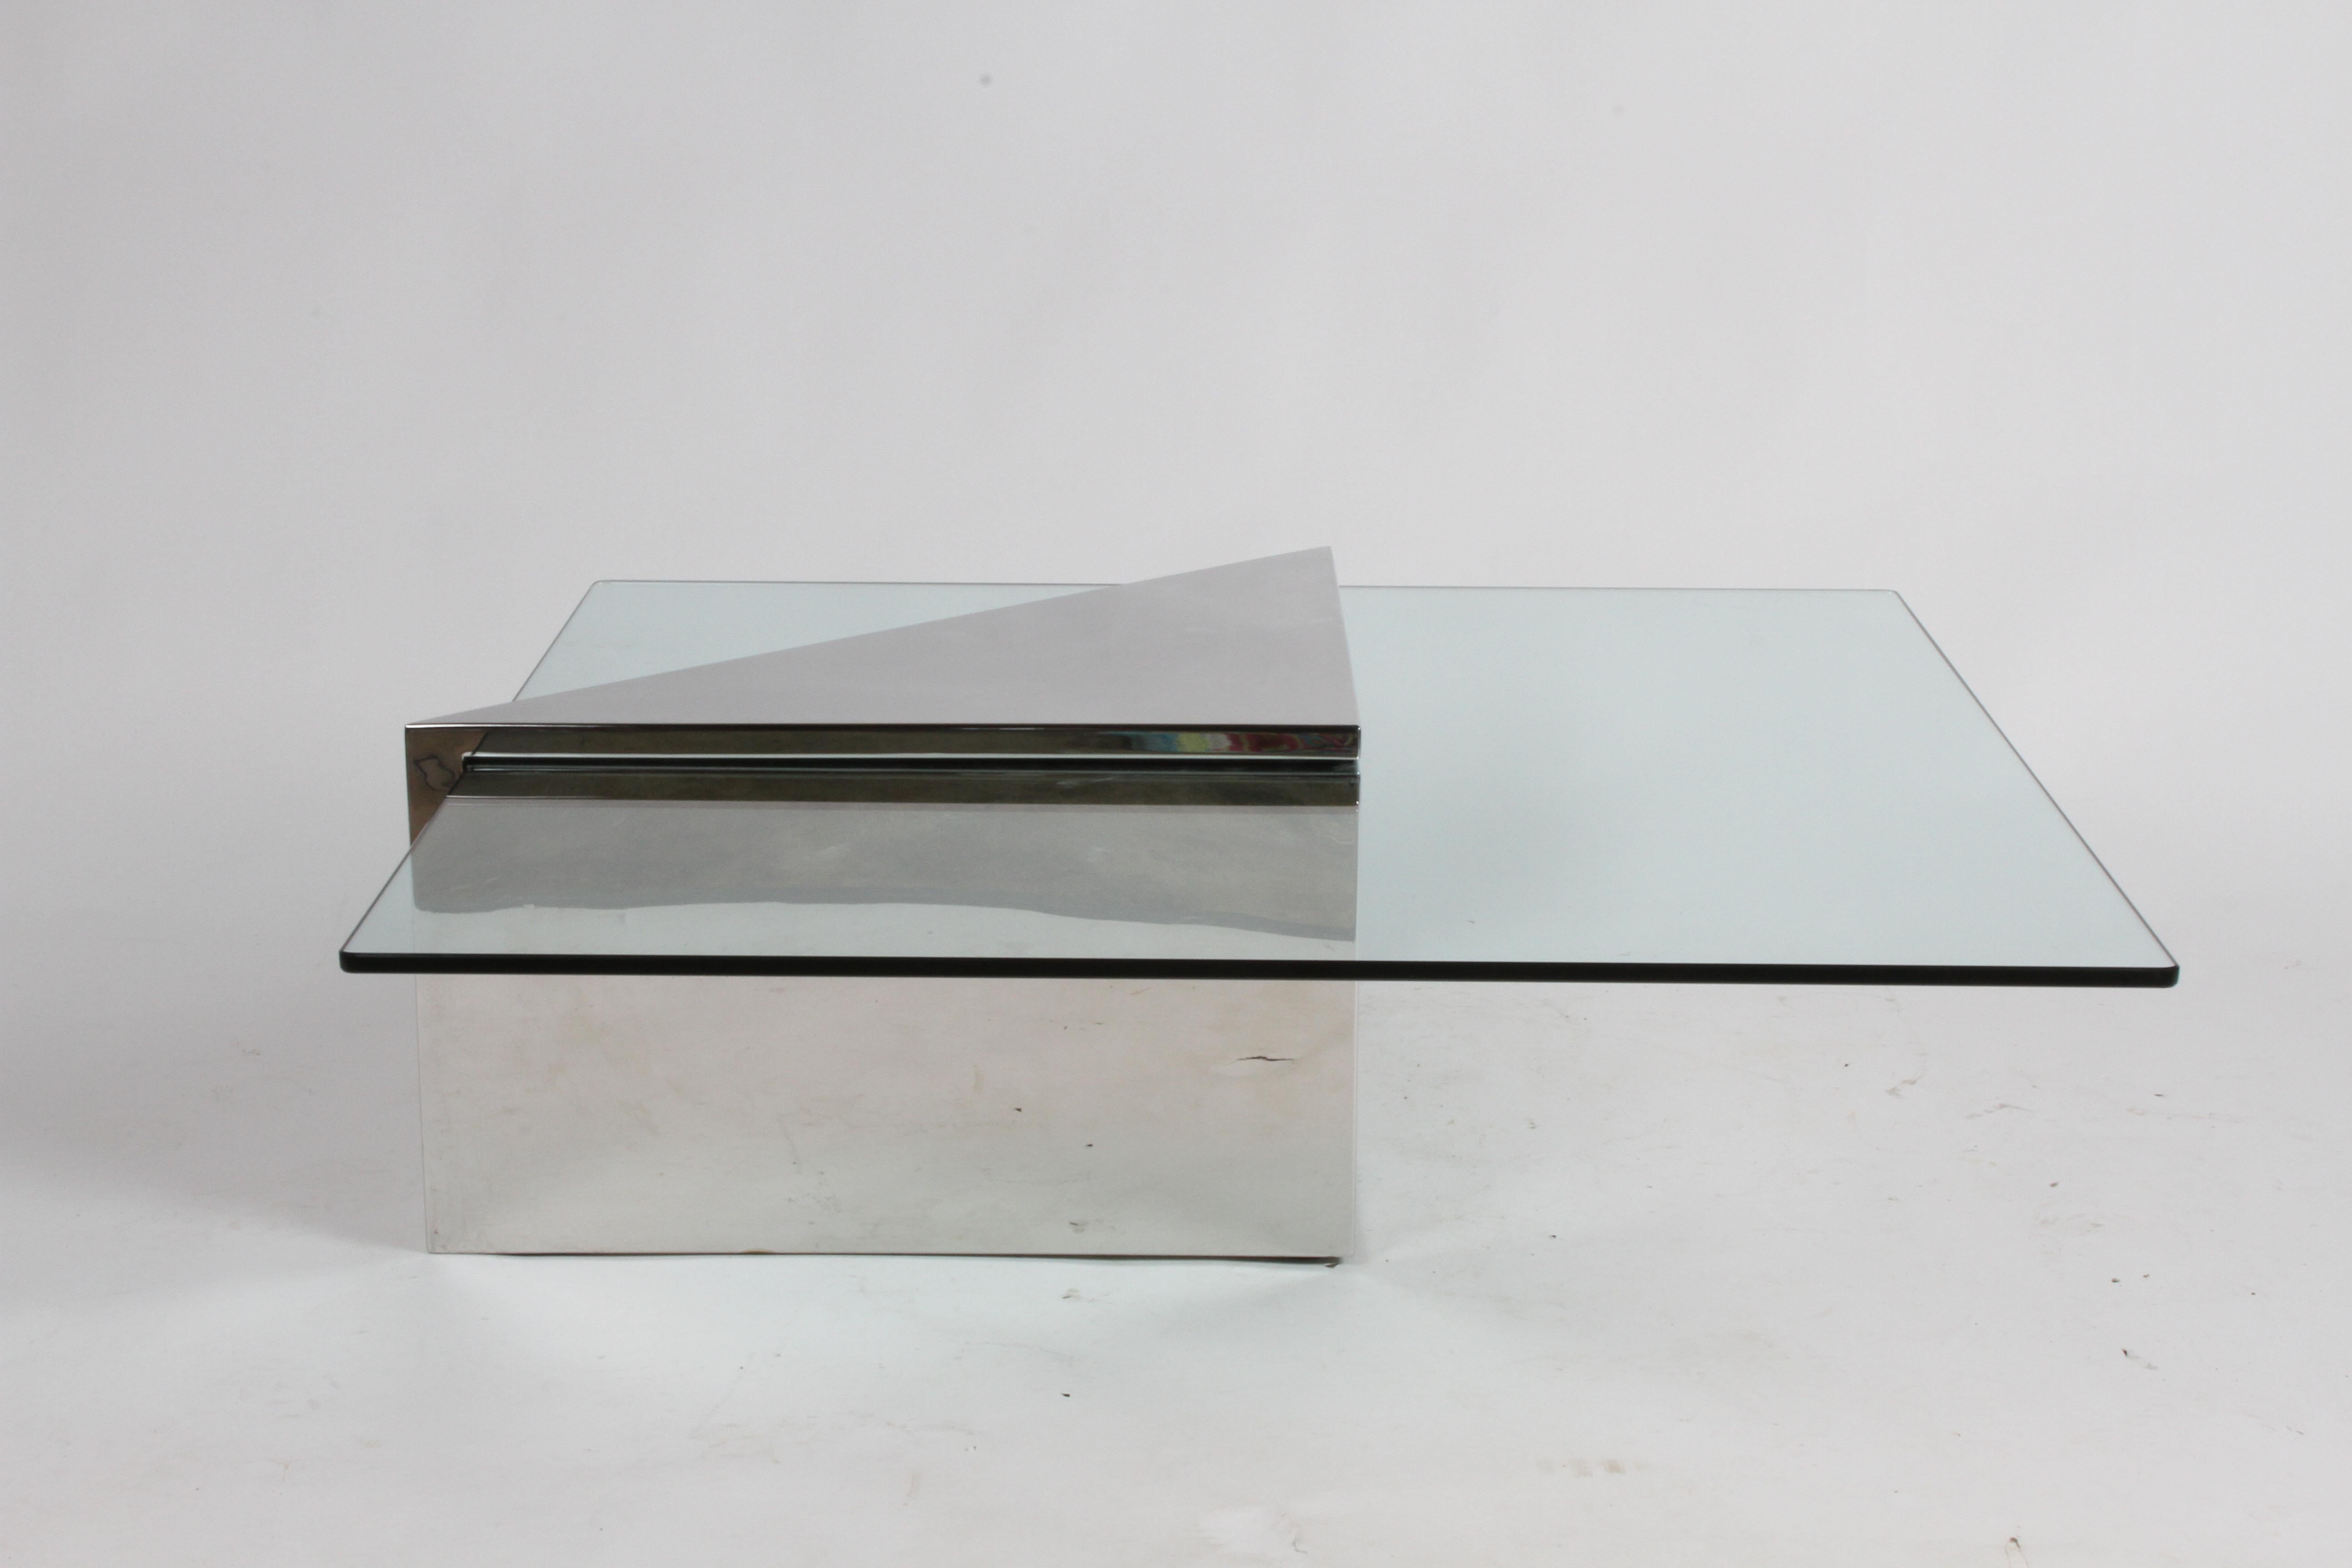 Triform coffee table designed by J. Wade Beam for Brueton, circa 1980s having a polished stainless monolithic triangular base with square glass top. Top of triangular base does show some surface scratches, since its stainless it can be polished out.